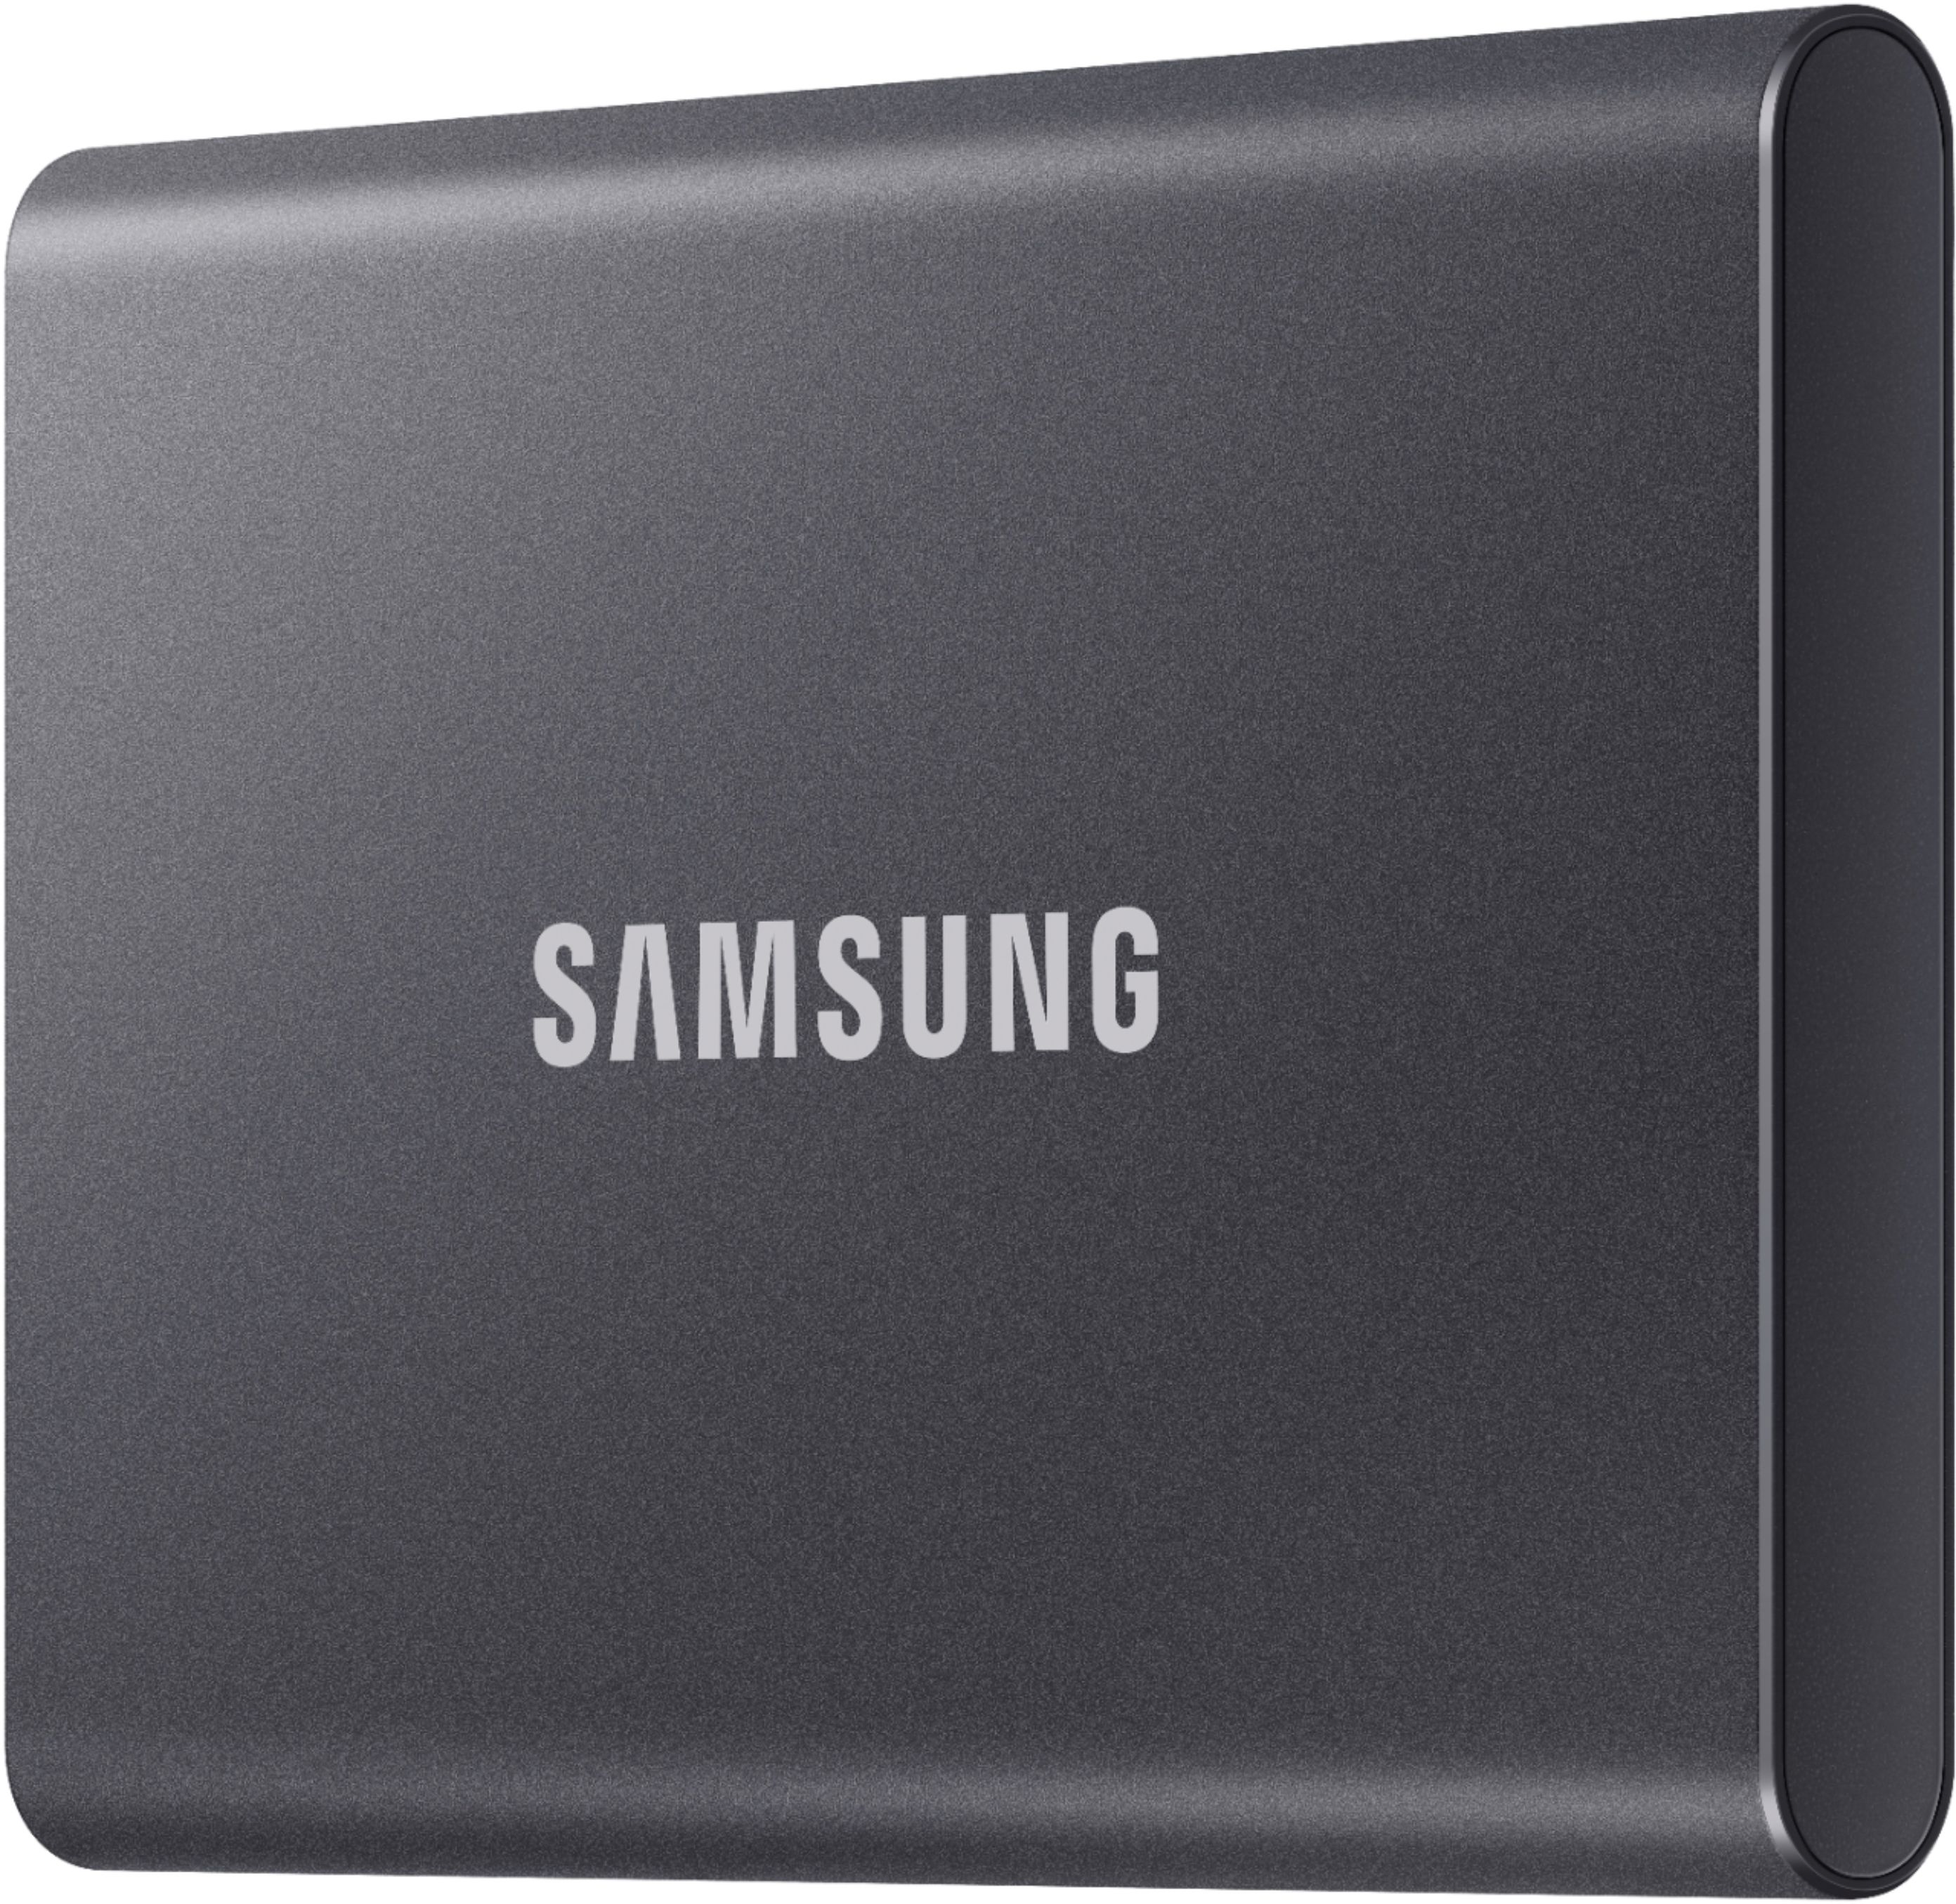 Samsung's Rugged and Portable T7 Shield SSD Is Now Just $60